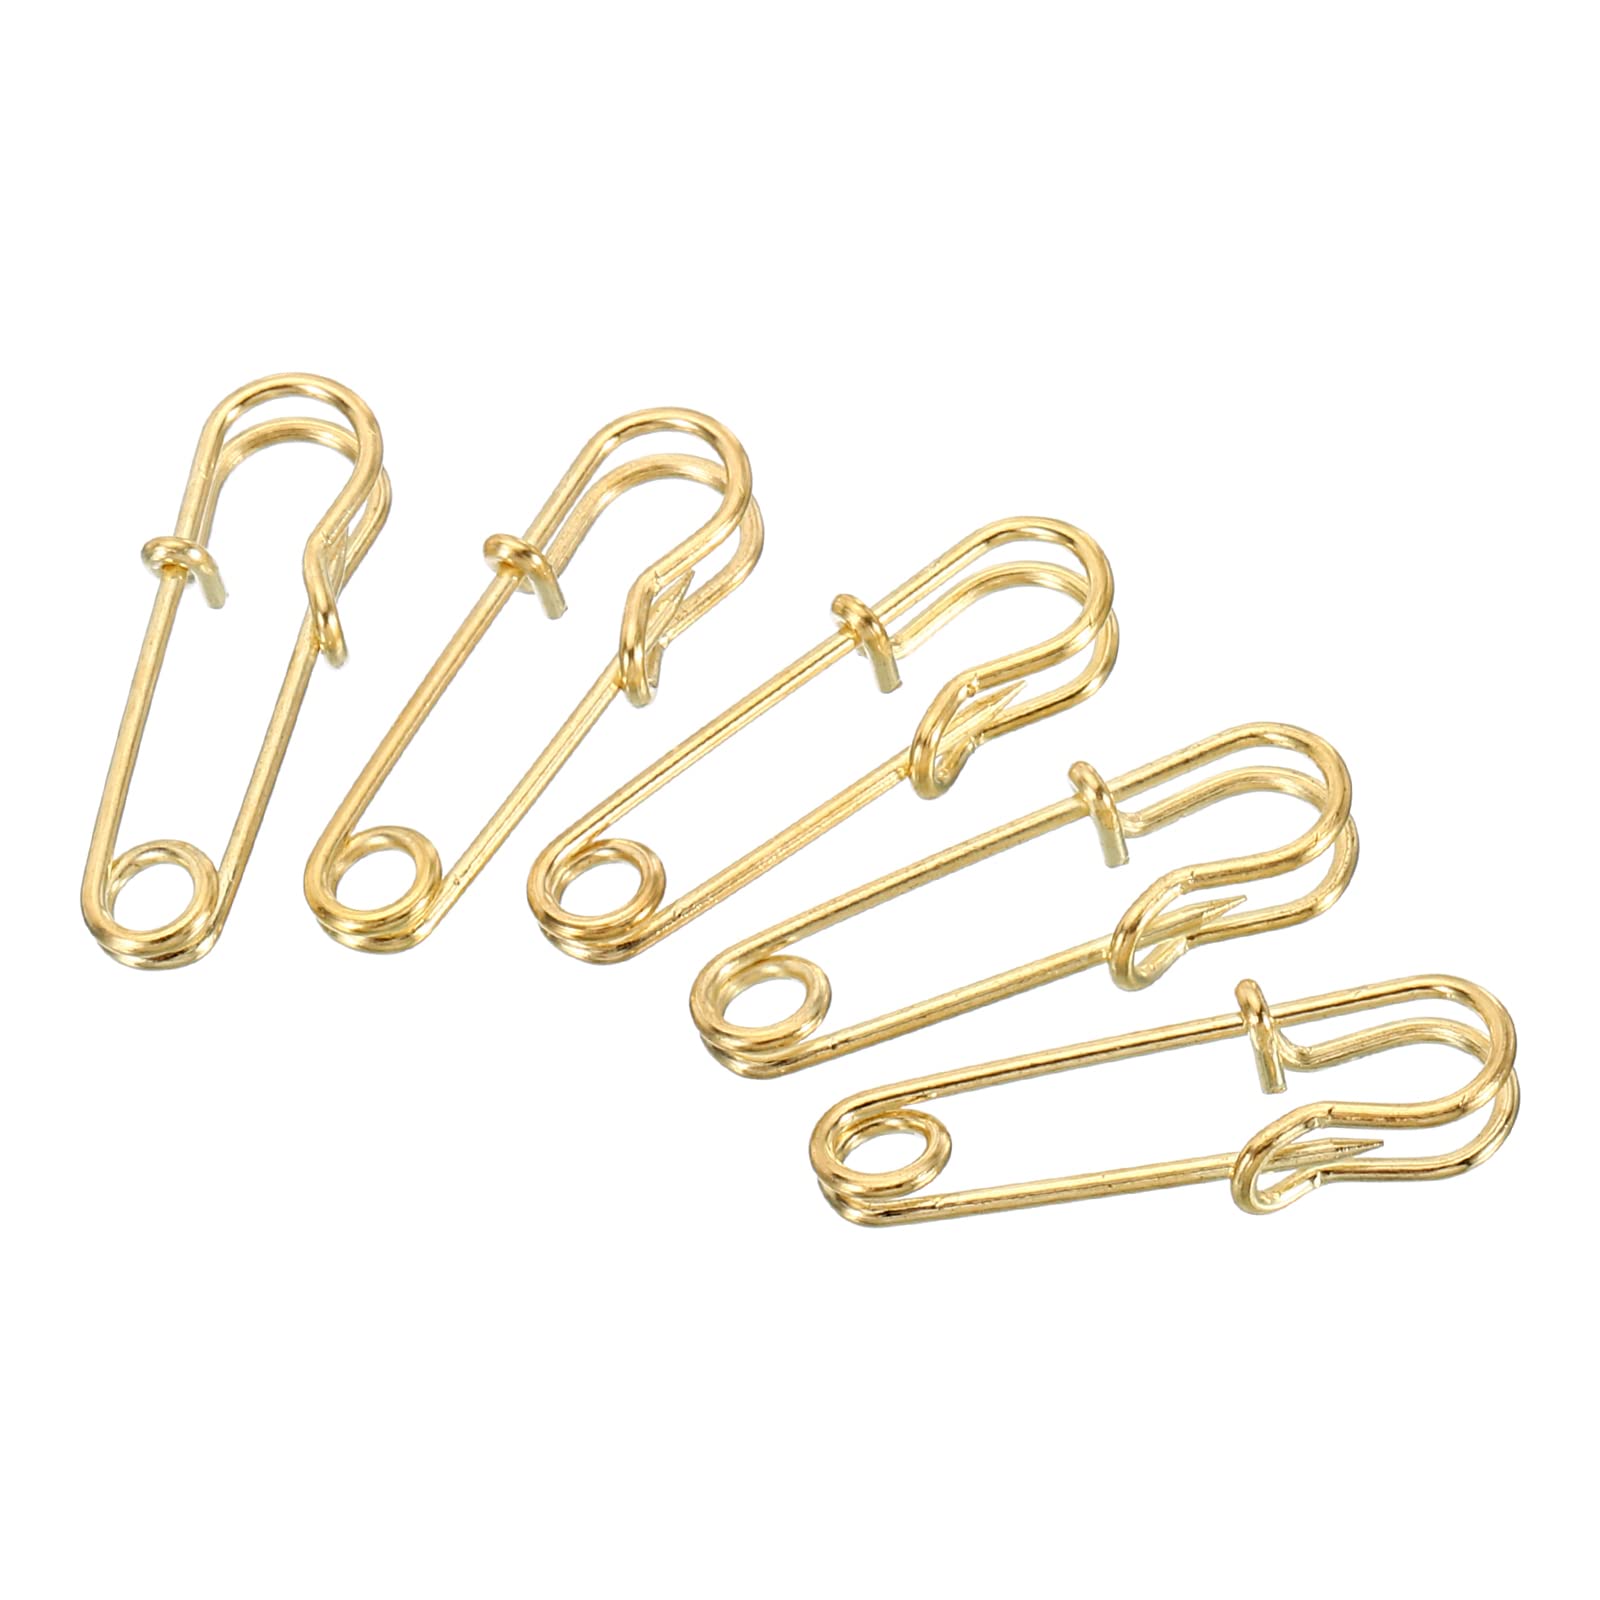 Mini Safety Pins 10pcs 208mm Copper Safety Pins Gold Plated Pins Brooch  Safety Pins Sewing Safety Pins Supply 